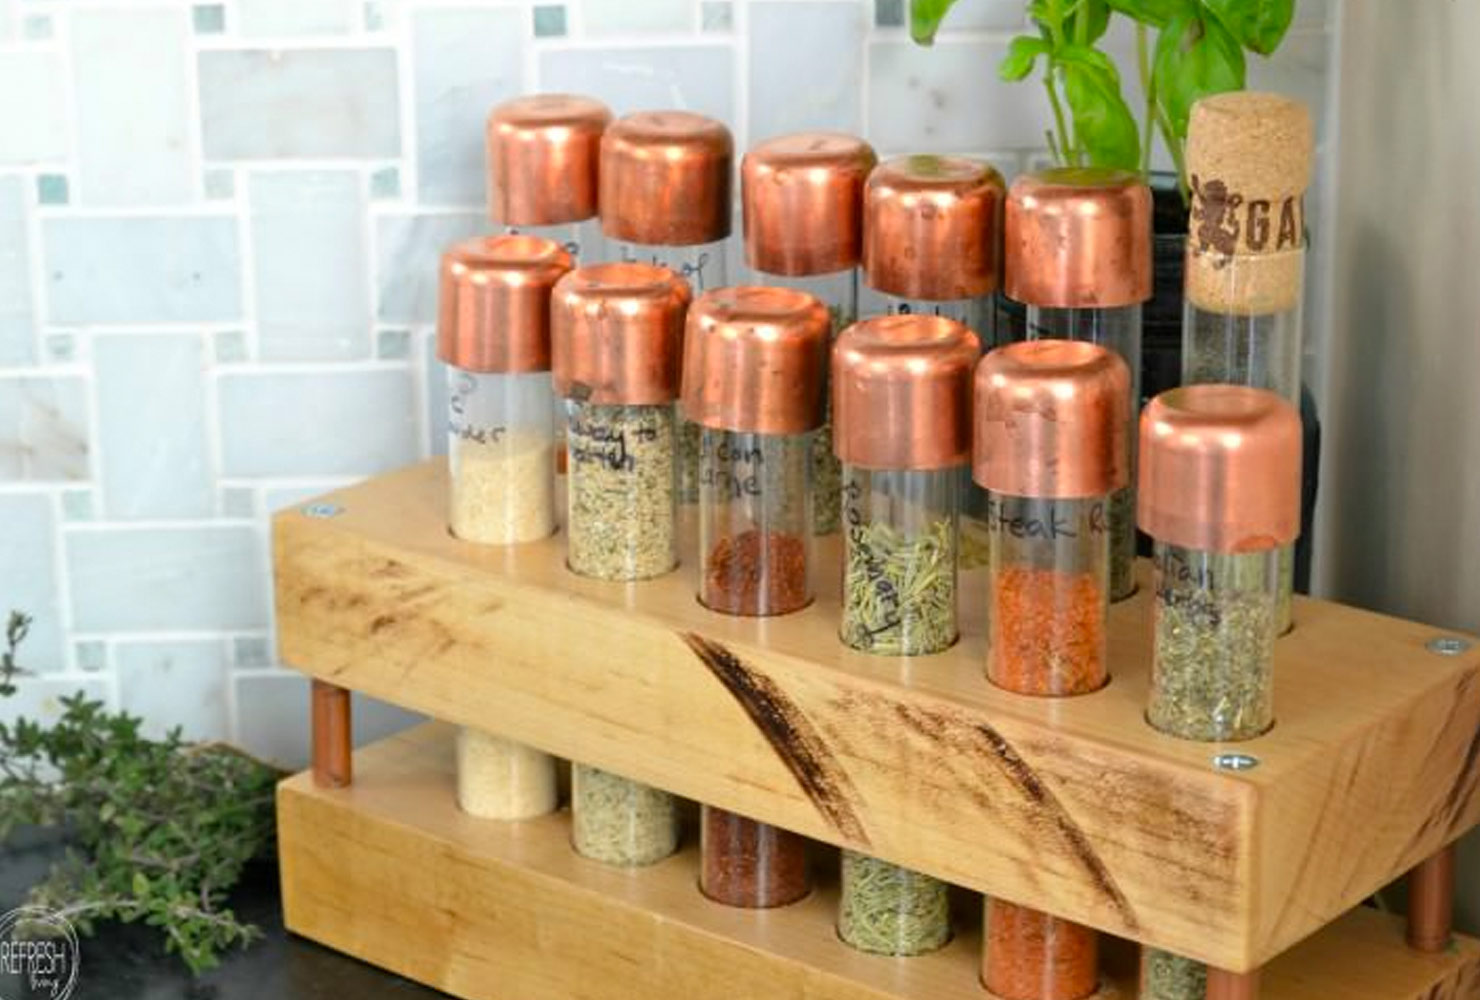 Copper topped spice bottles.